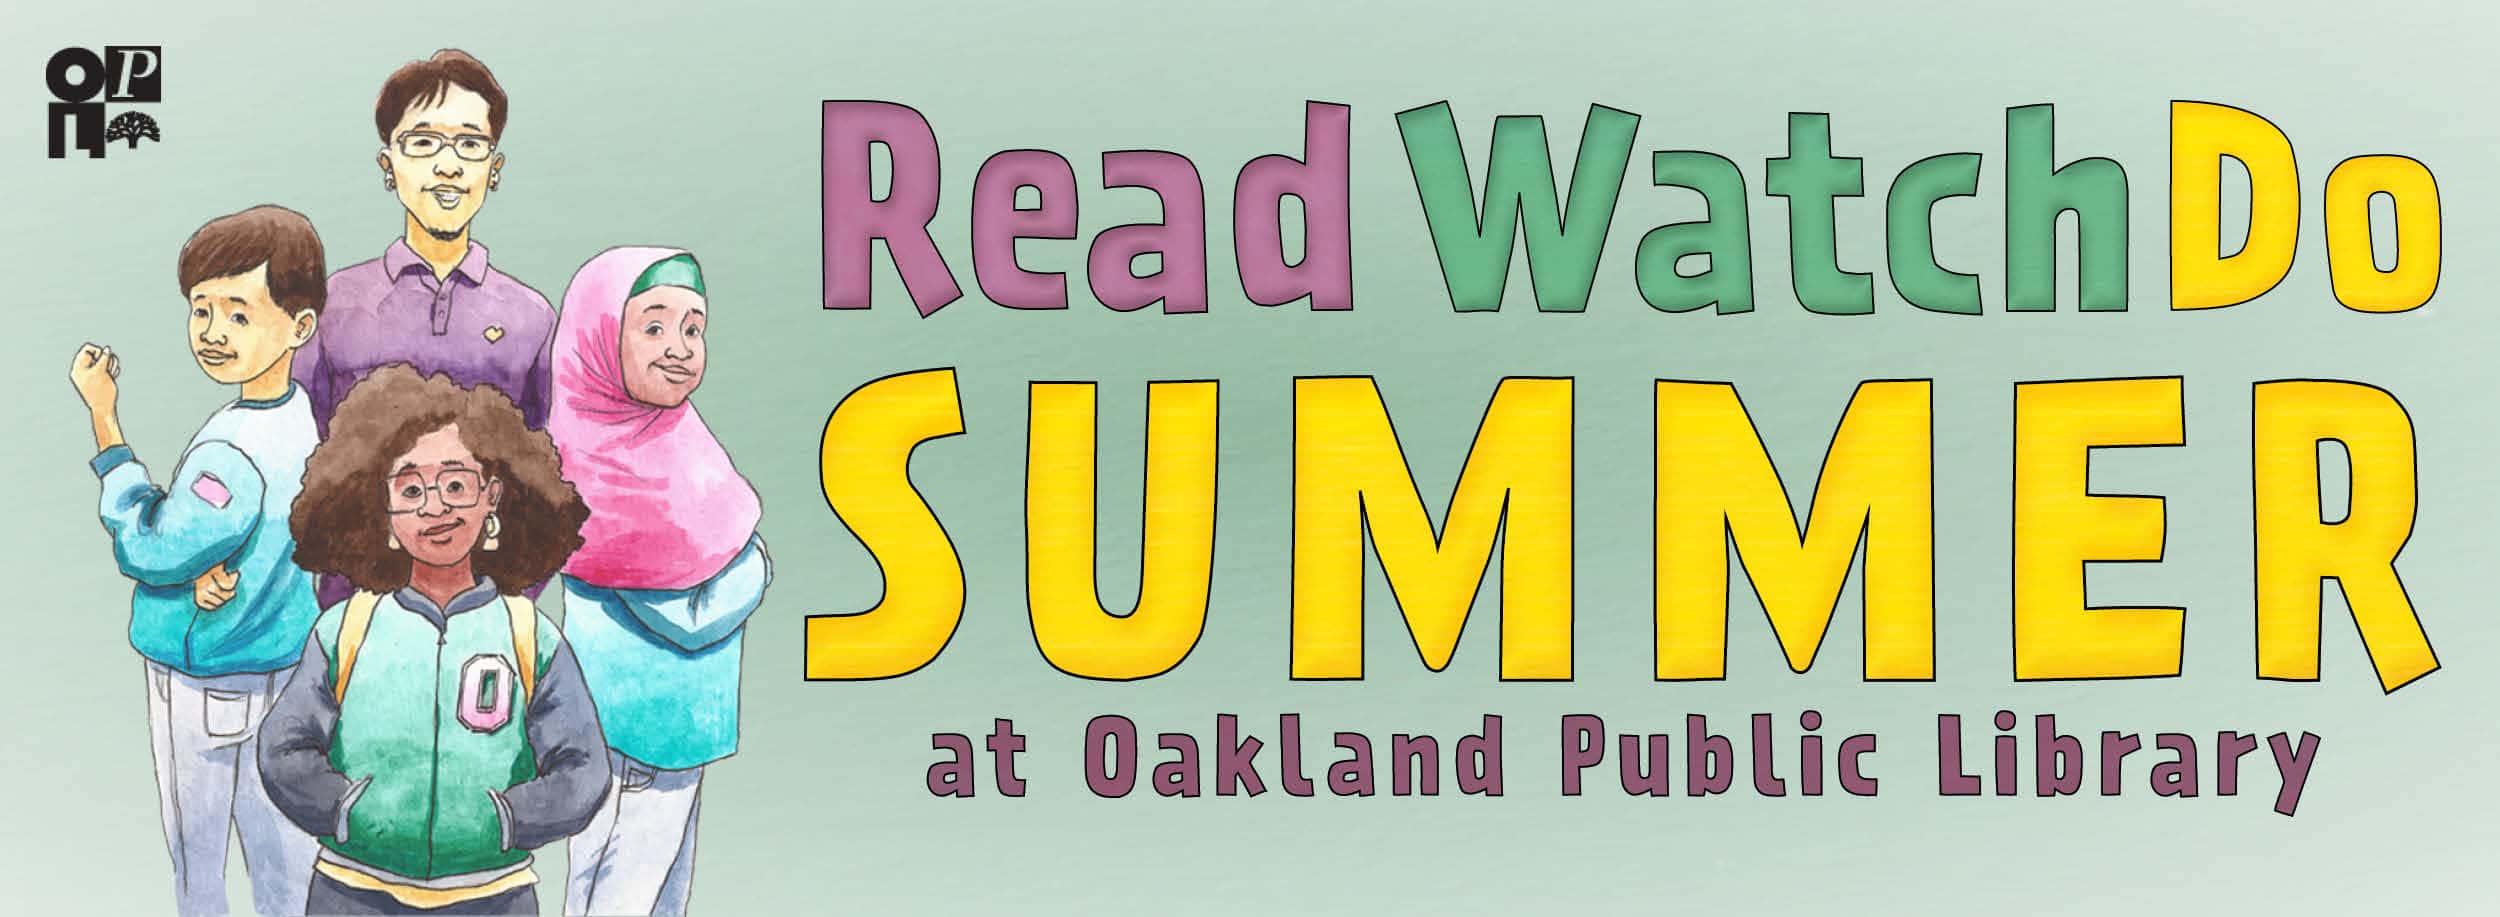 Read Watch Do Summer at Oakland Public Library